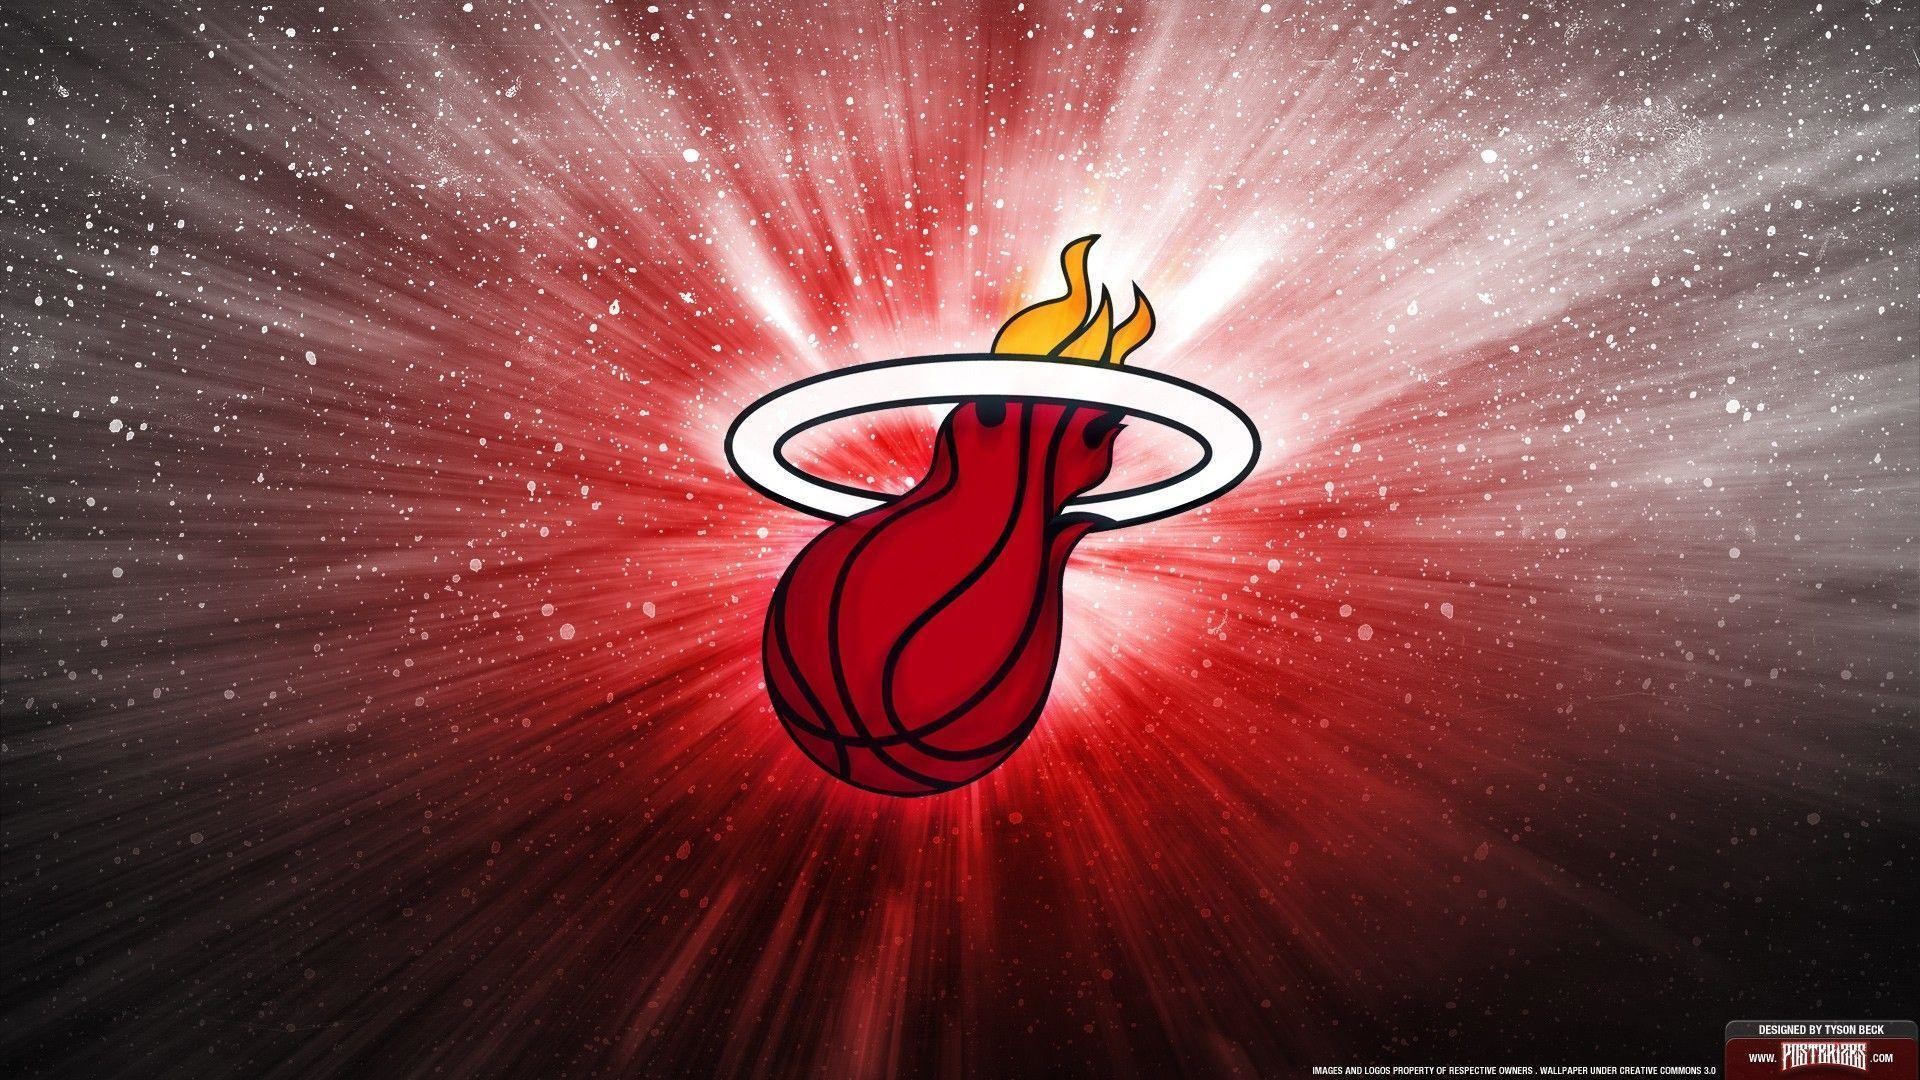 1920x1080 Miami Heat Logo Pictures HD Wallpaper | HD Wallpapers Source